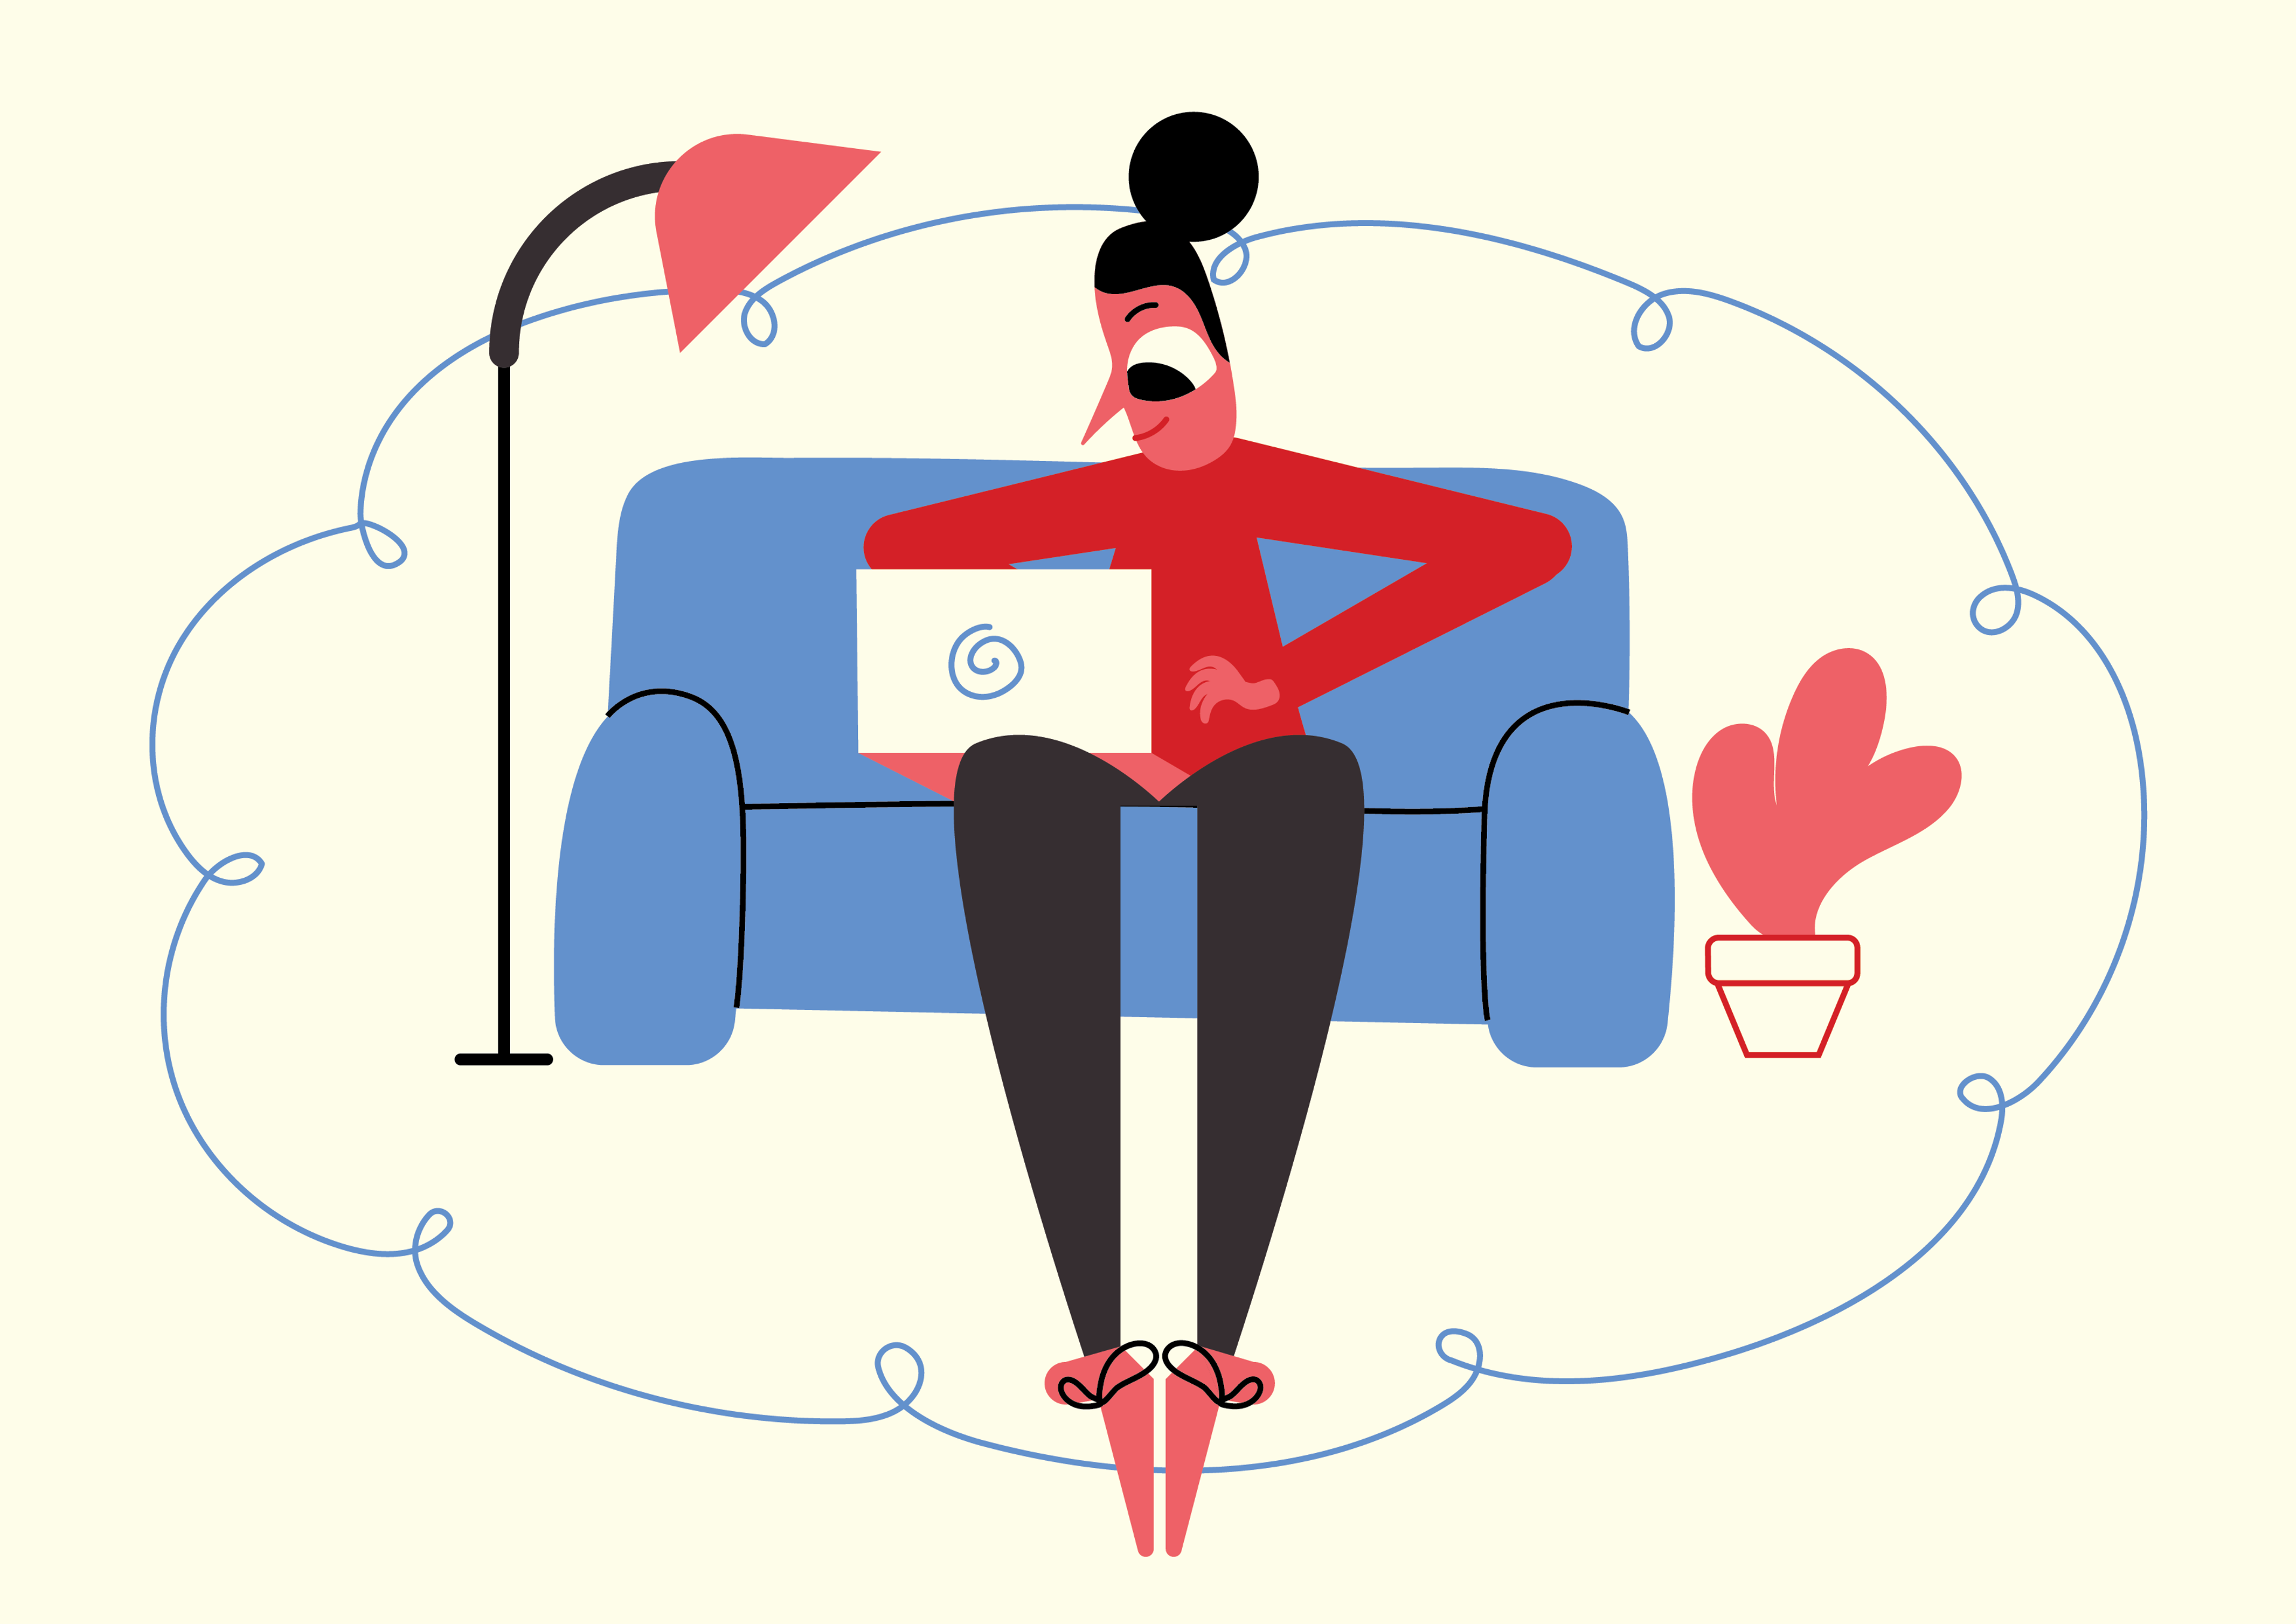 Woman on a couch